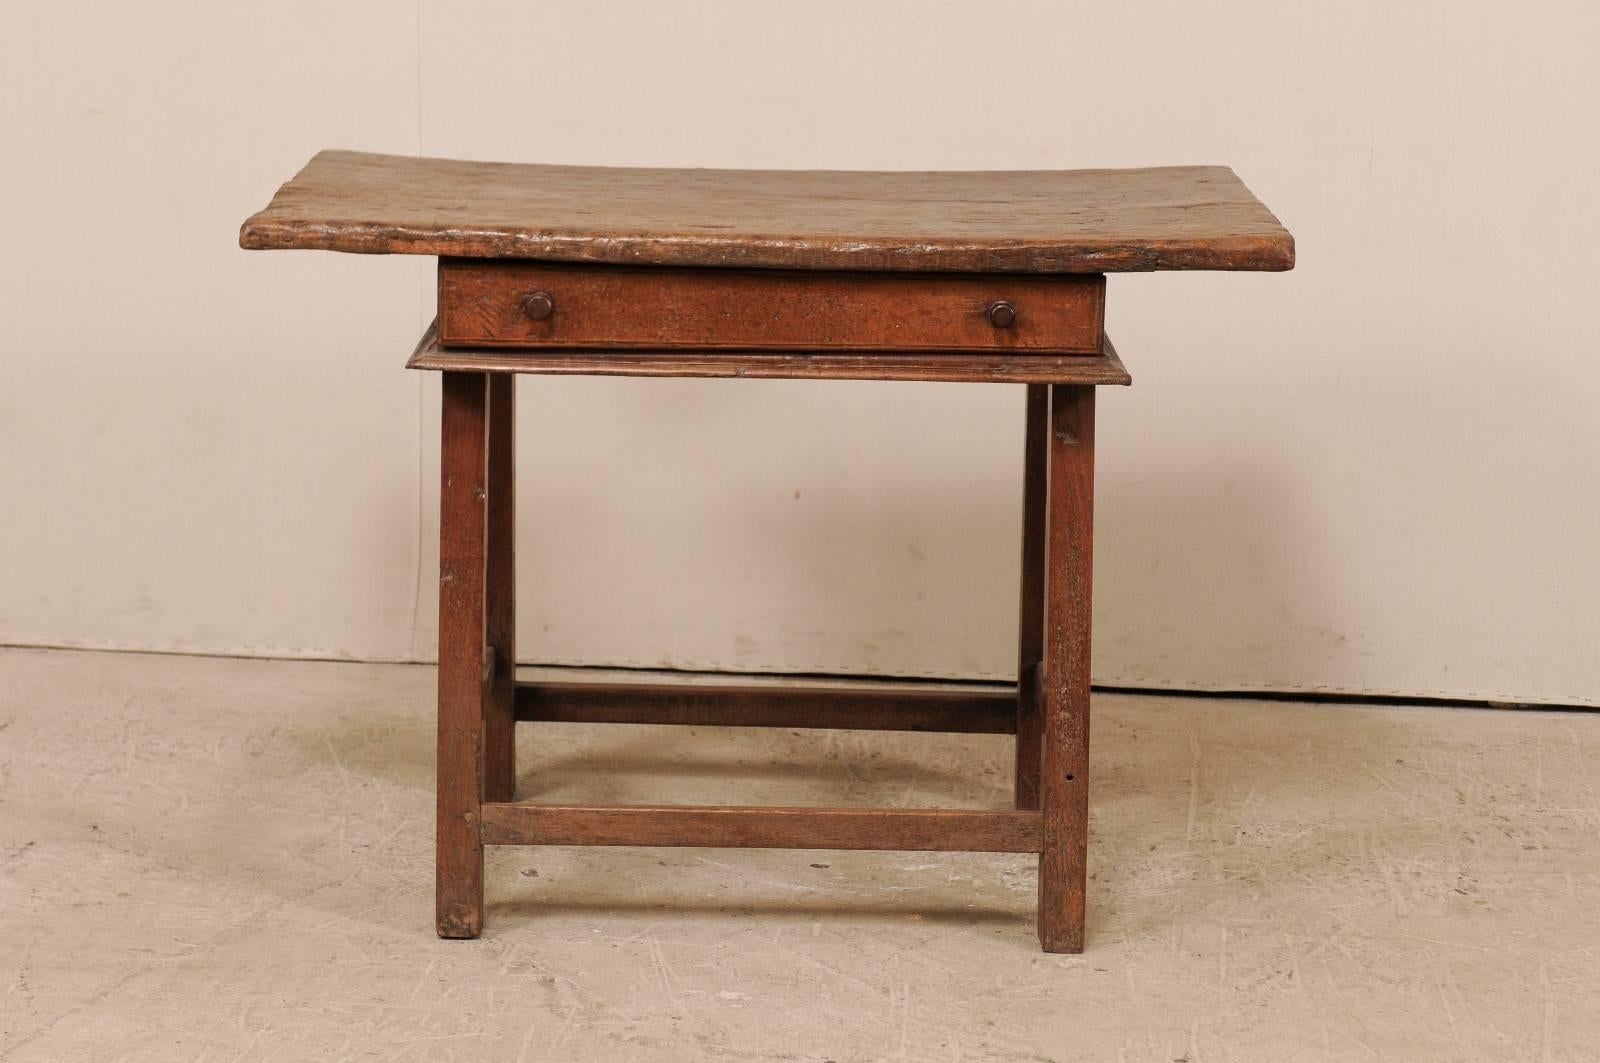 An 18th century Brazilian table. This antique Brazilian table has a single drawer and wooden stretchers along all sides, and an overhanging rectangular-shaped top. The table is comprised of peroba wood (a tropical native hardwood, 35% harder than